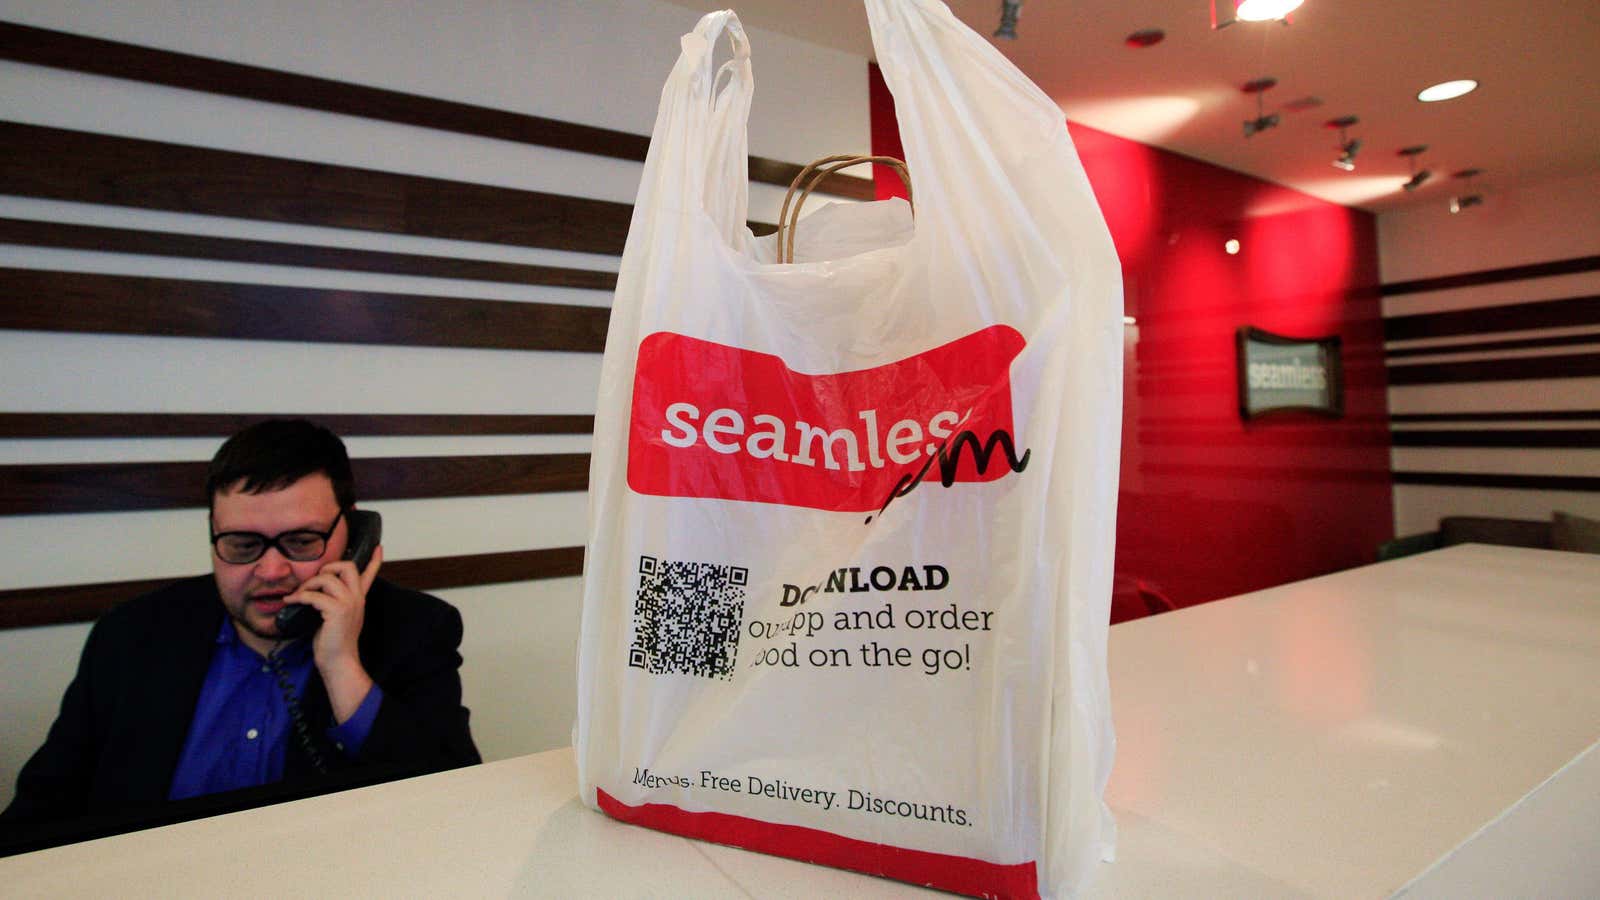 Seamless is losing ground in the online delivery game.